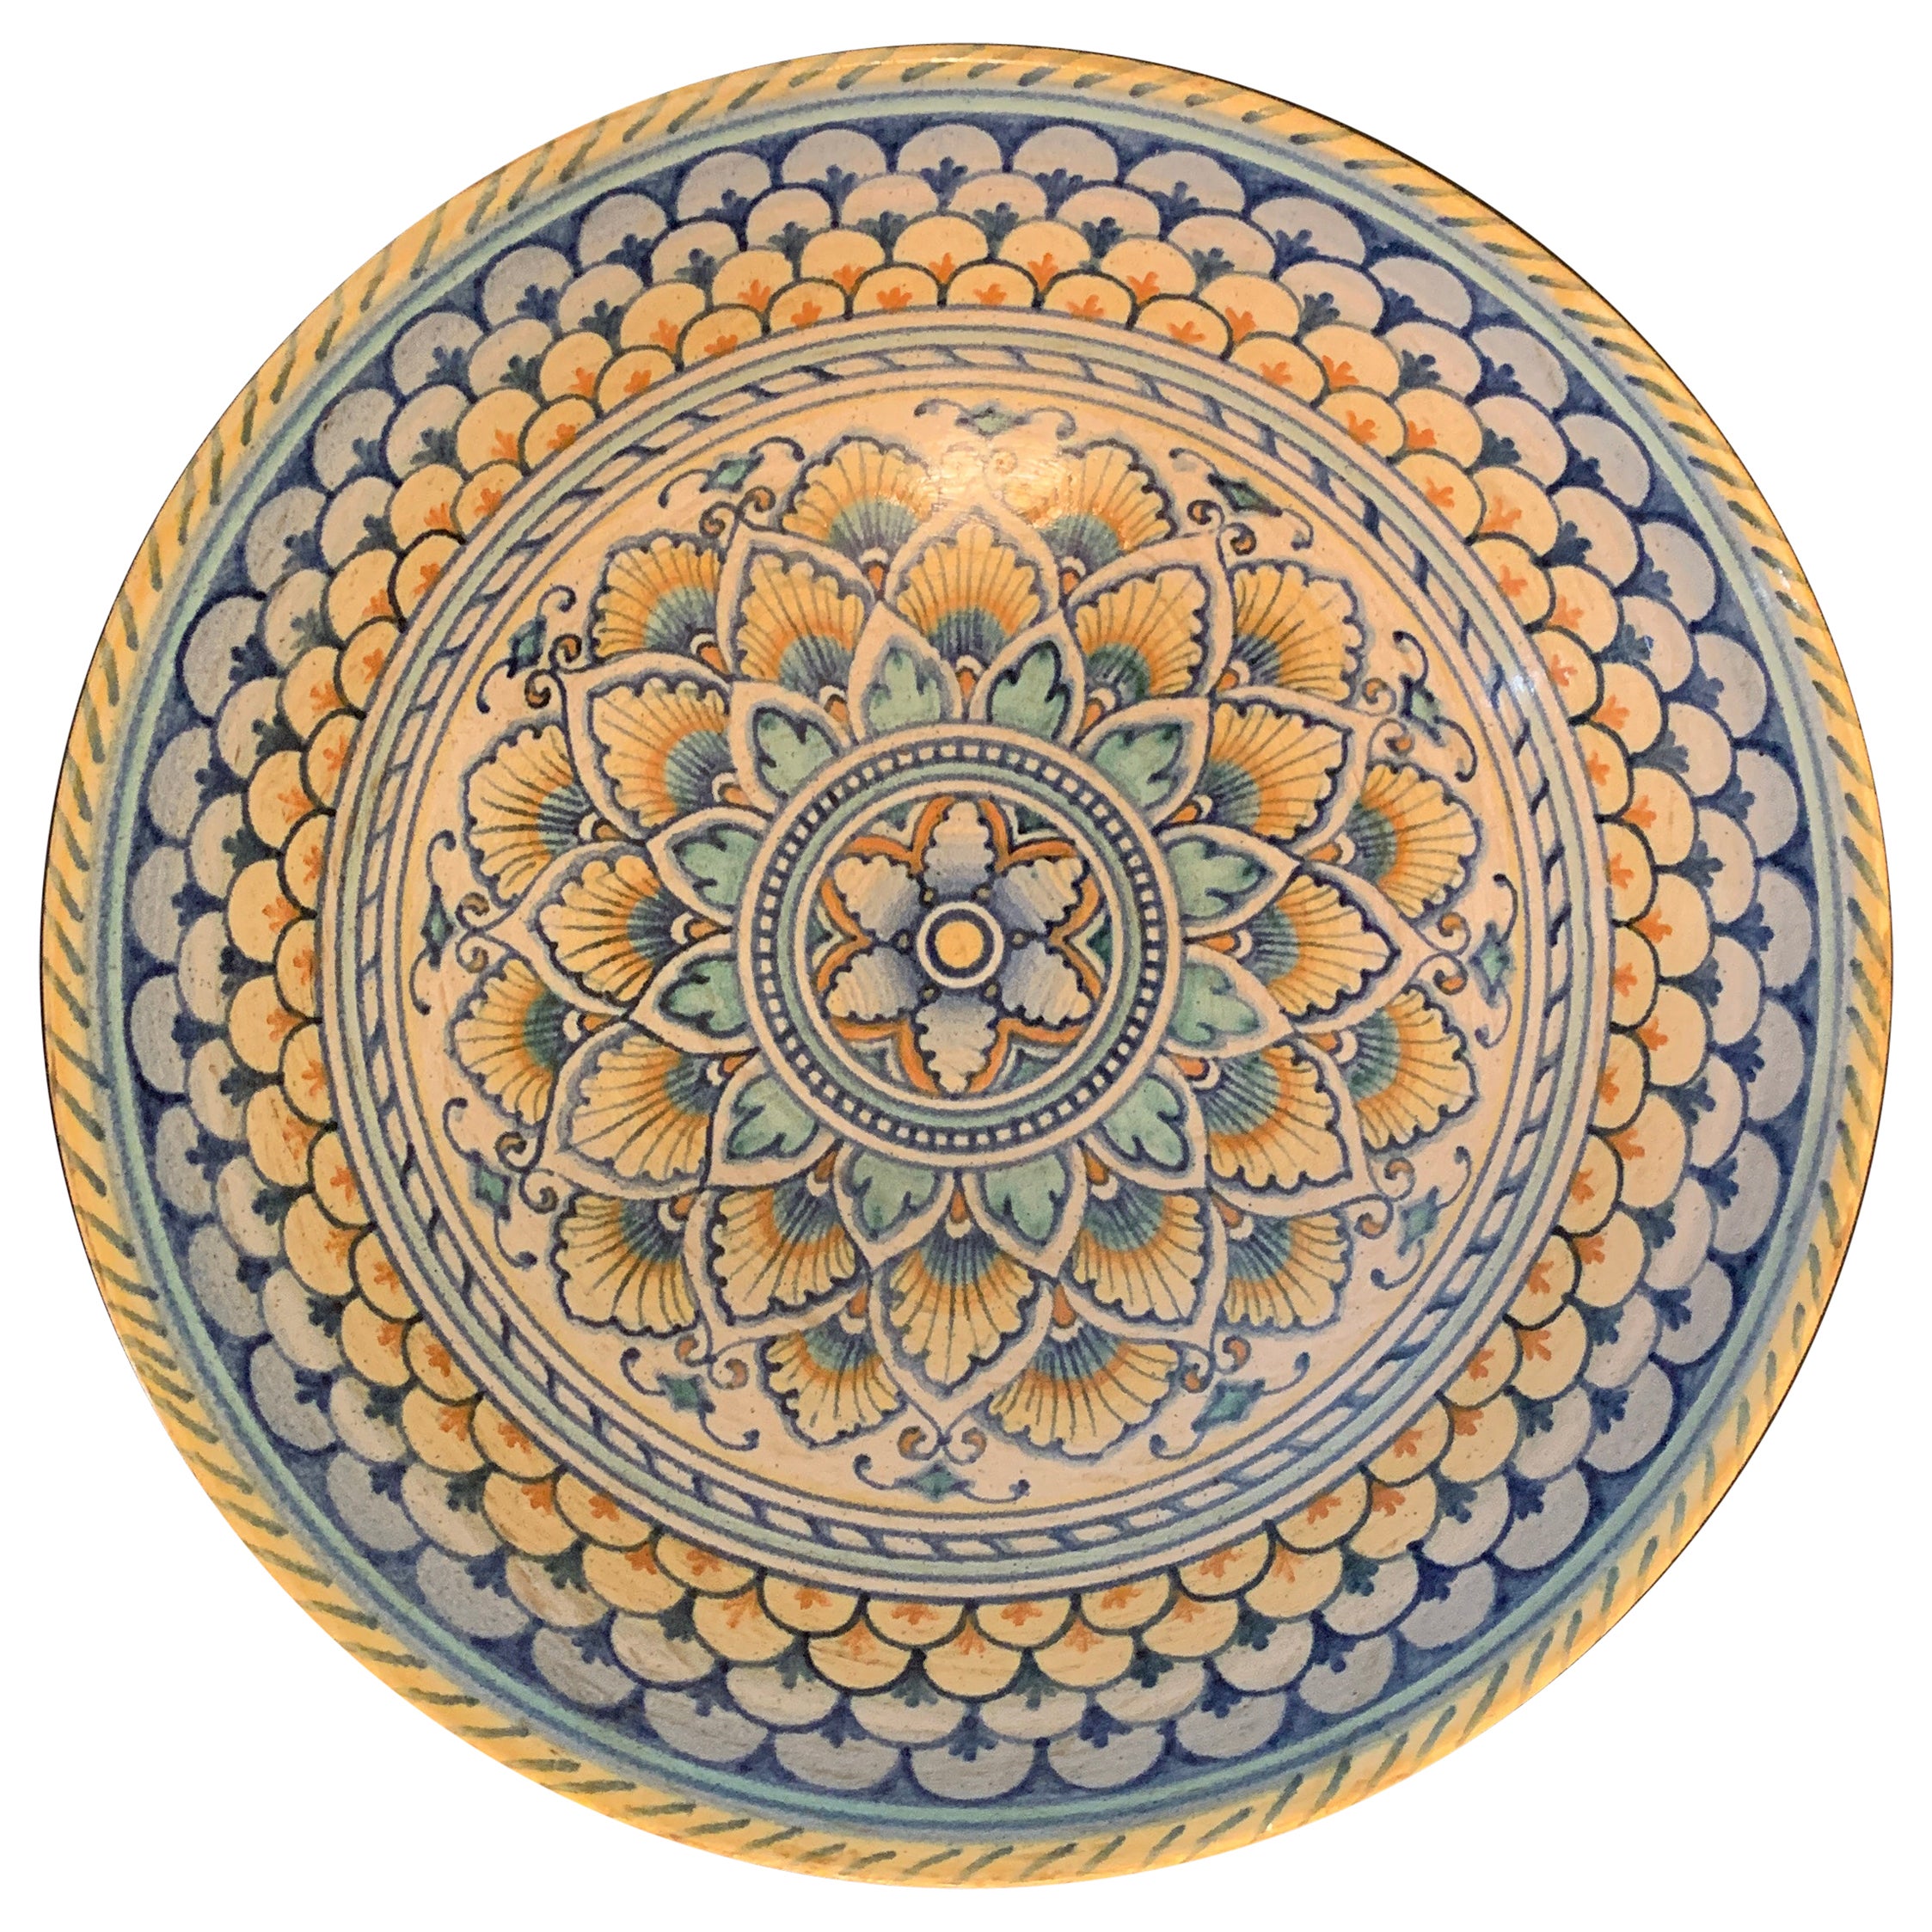 Italian Provincial Deruta Hand Painted Faience Pottery Bowl